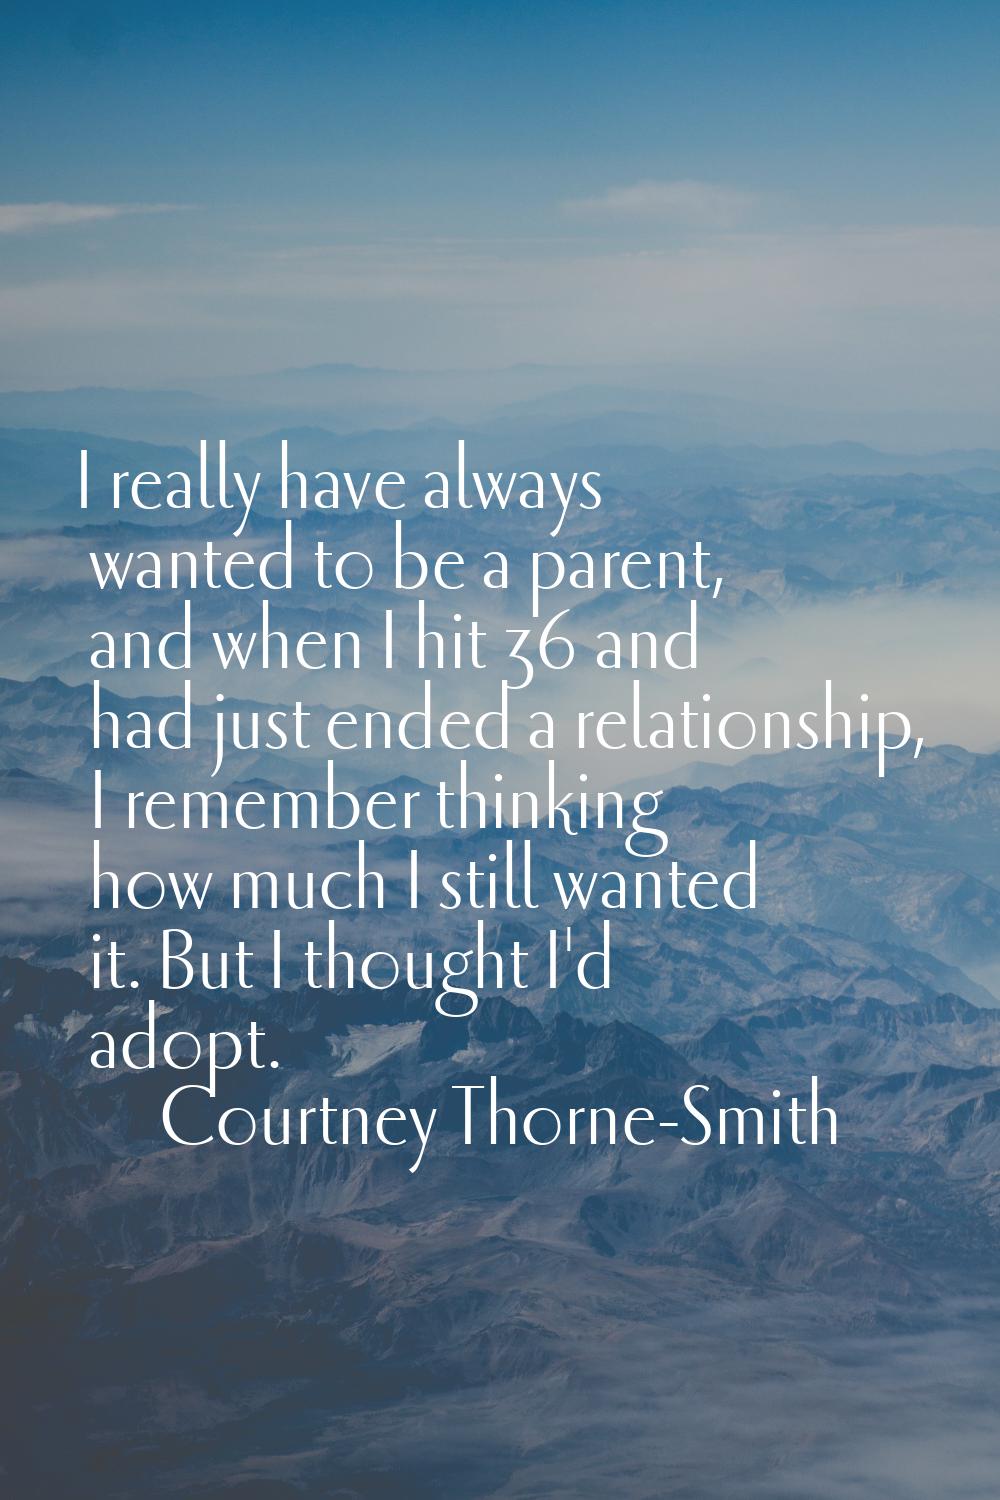 I really have always wanted to be a parent, and when I hit 36 and had just ended a relationship, I 